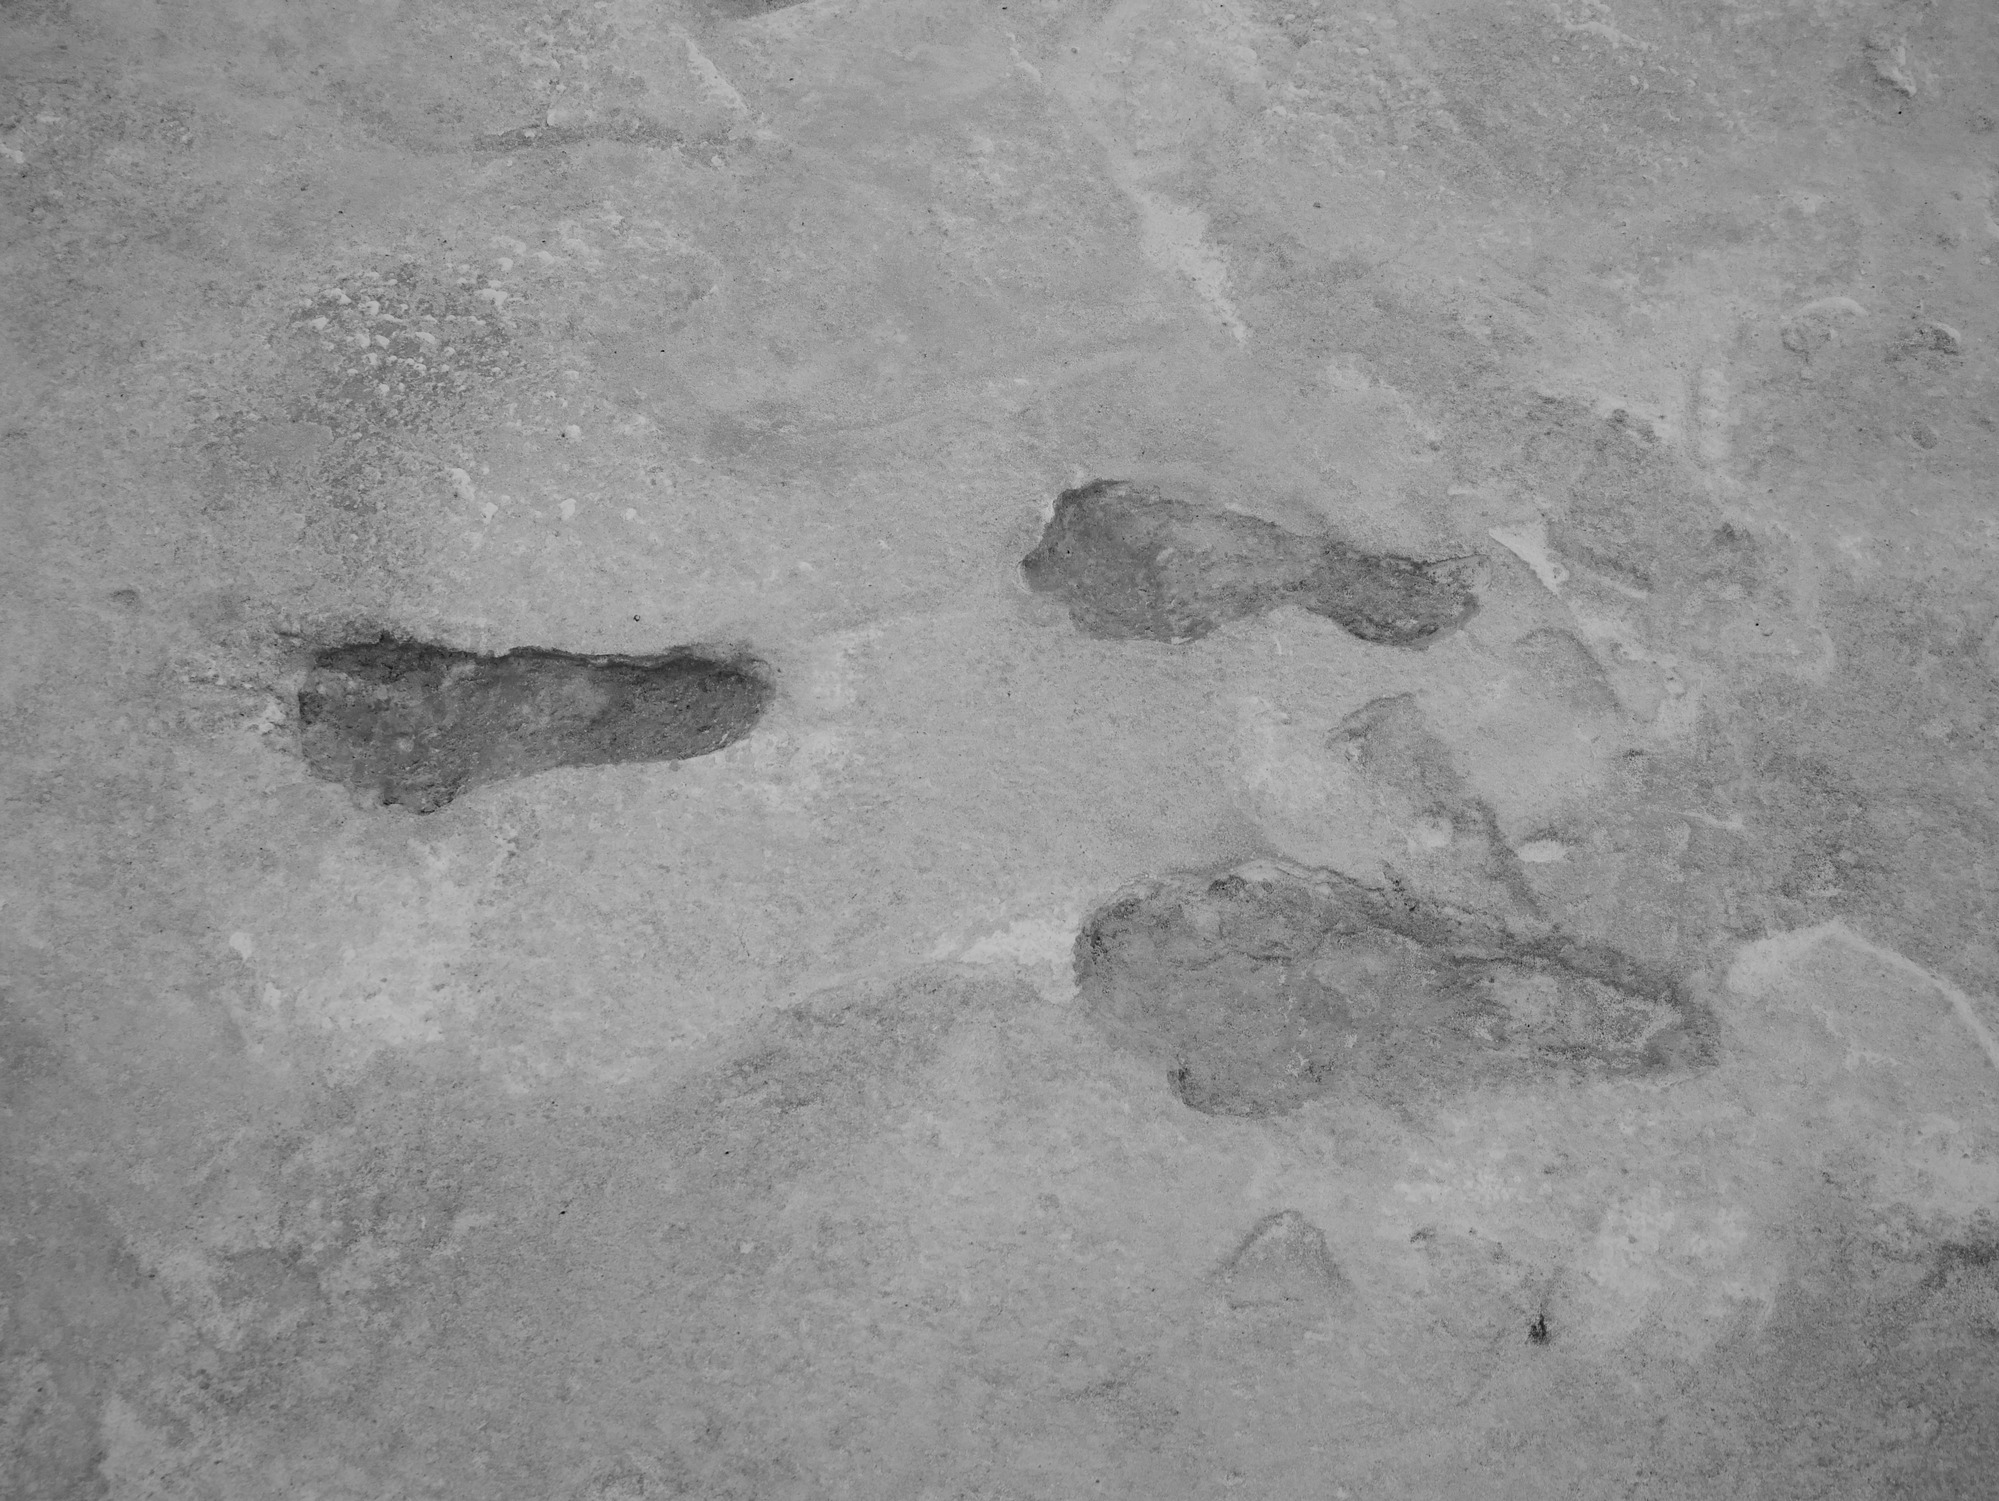 Aerial image of three fossilized human footprints in black and white. 